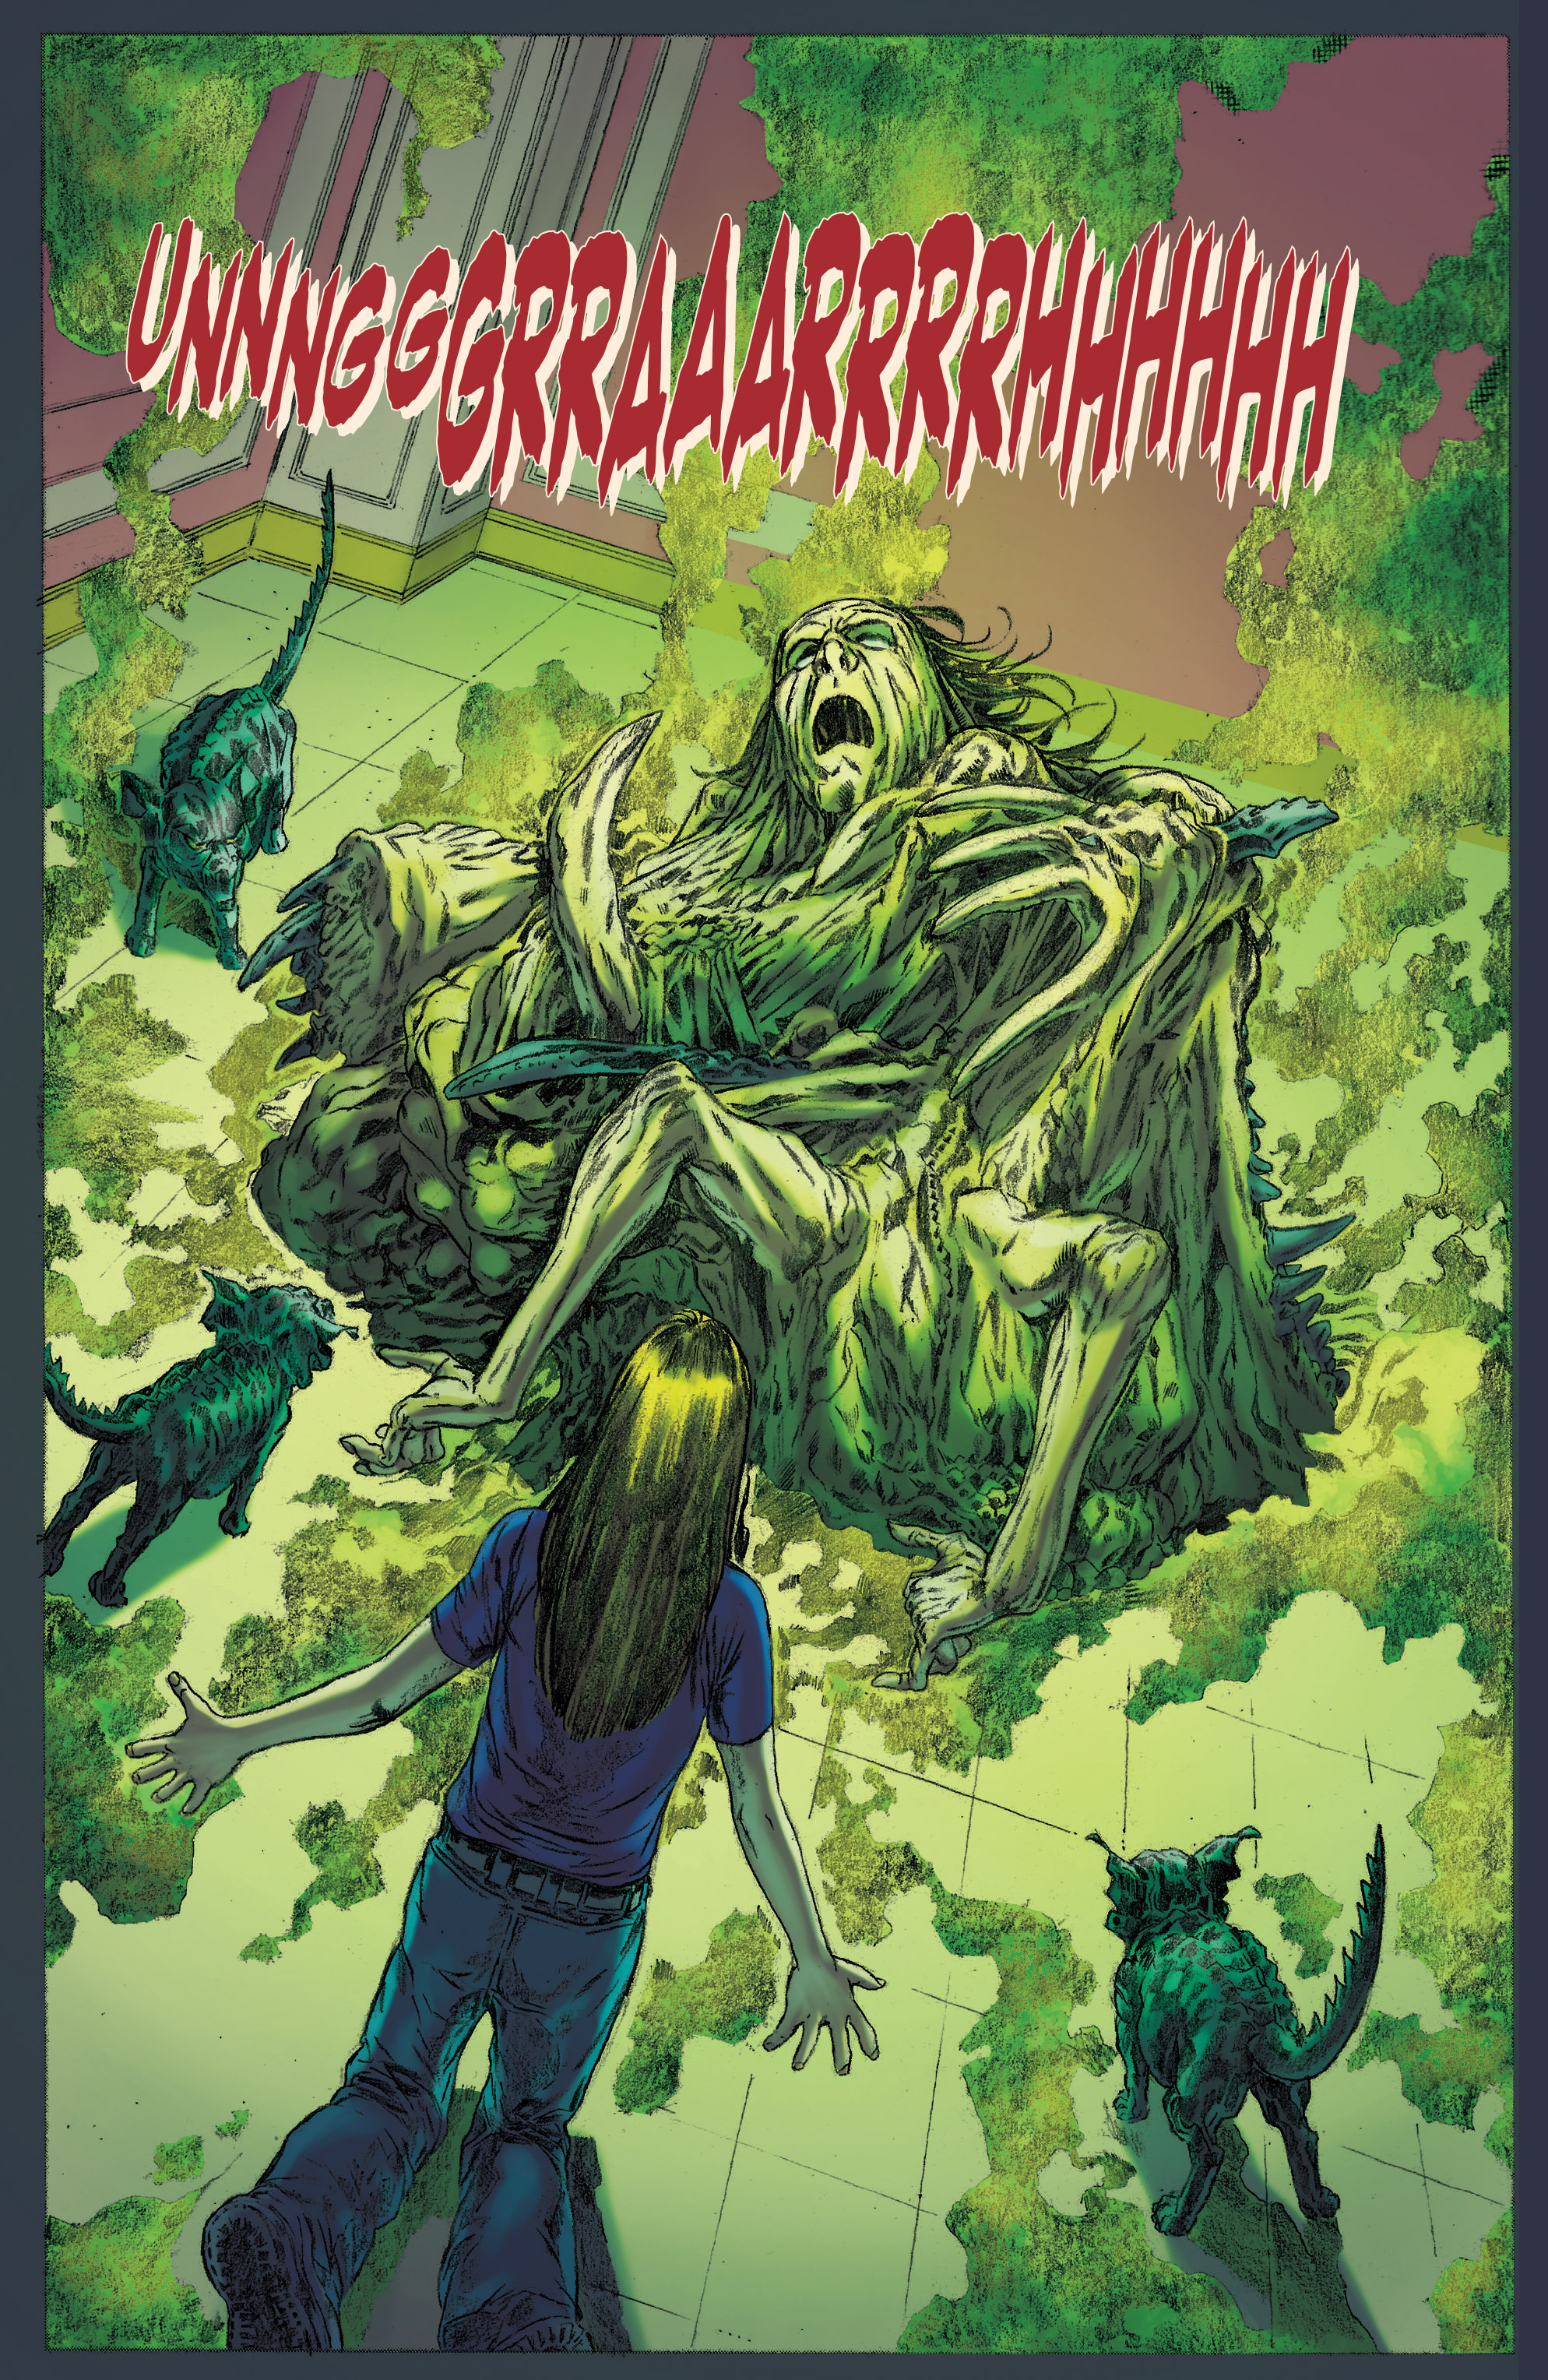 Read online Witchblade: Borne Again comic -  Issue # TPB 3 - 15